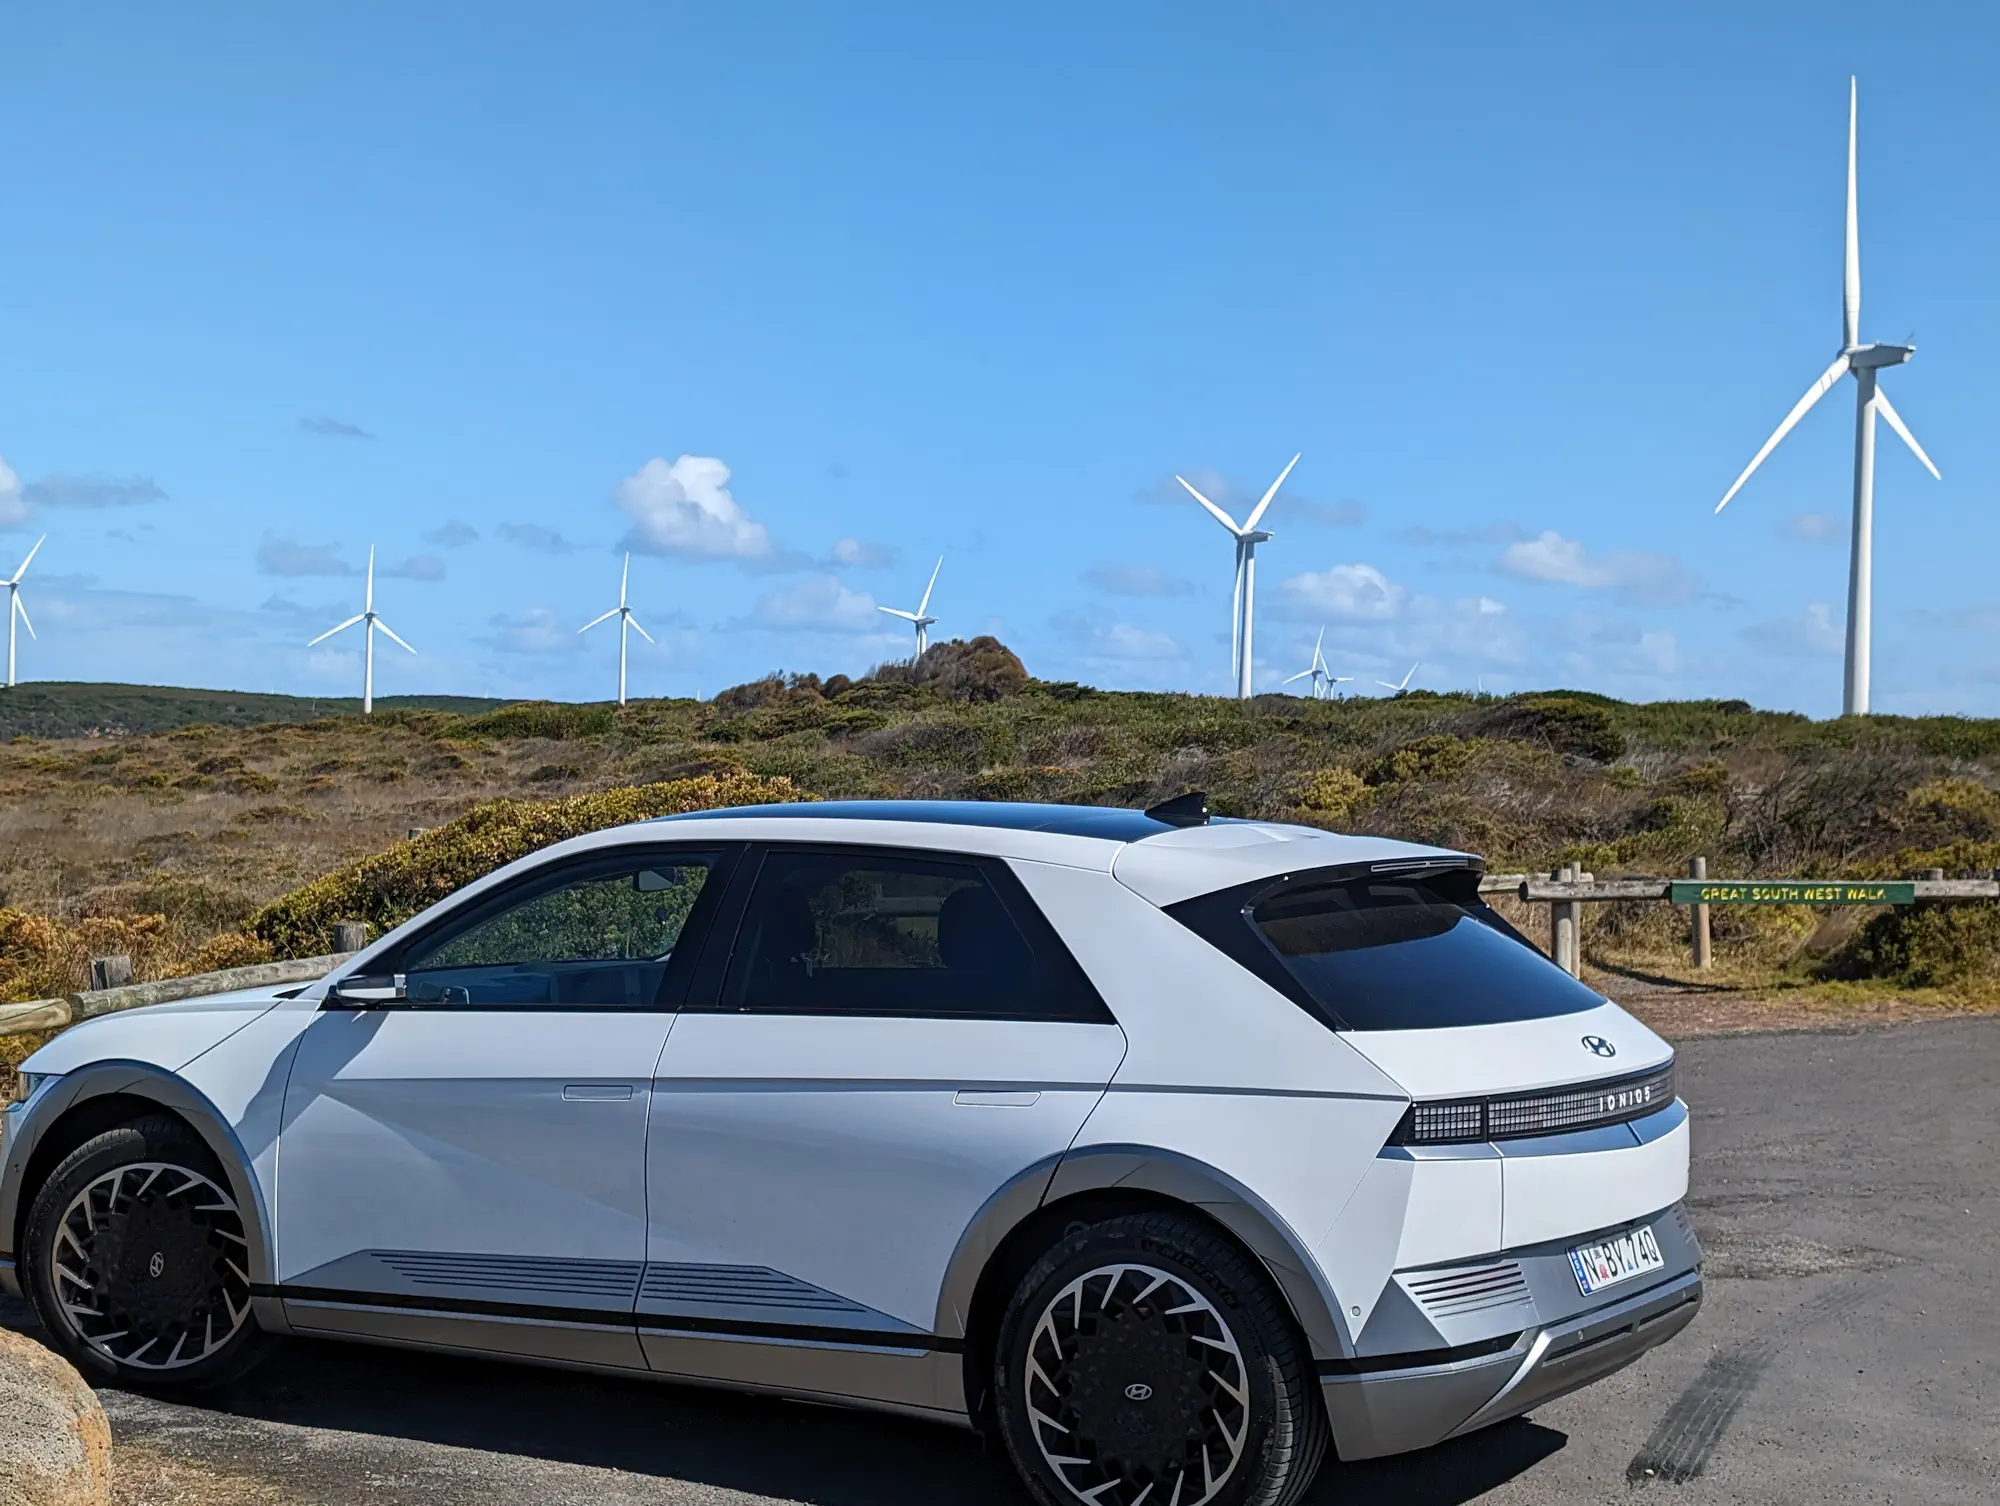 Melbourne to Mount Gambier return – Ioniq 5 electric car road trip diary